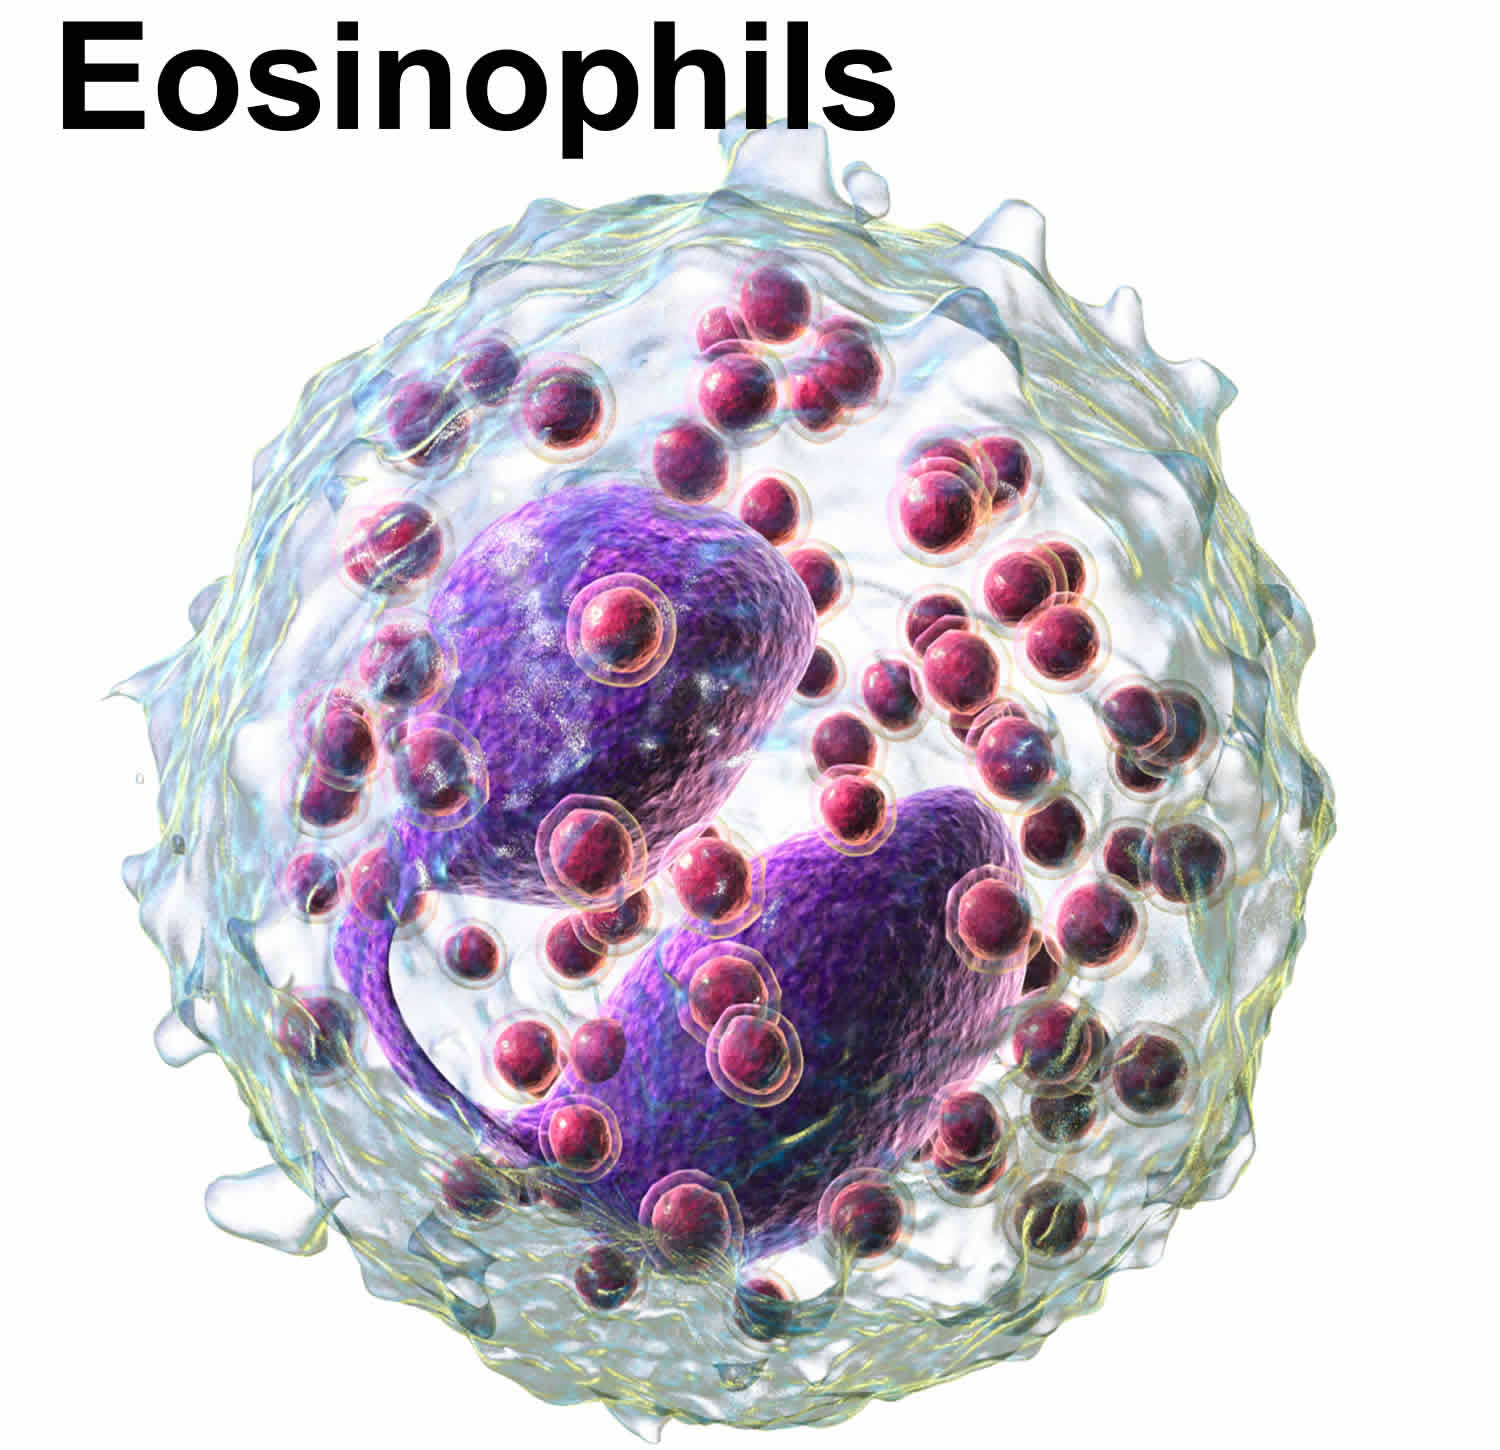 eosinophils-eosinophils-function-causes-of-high-and-low-eosinophils